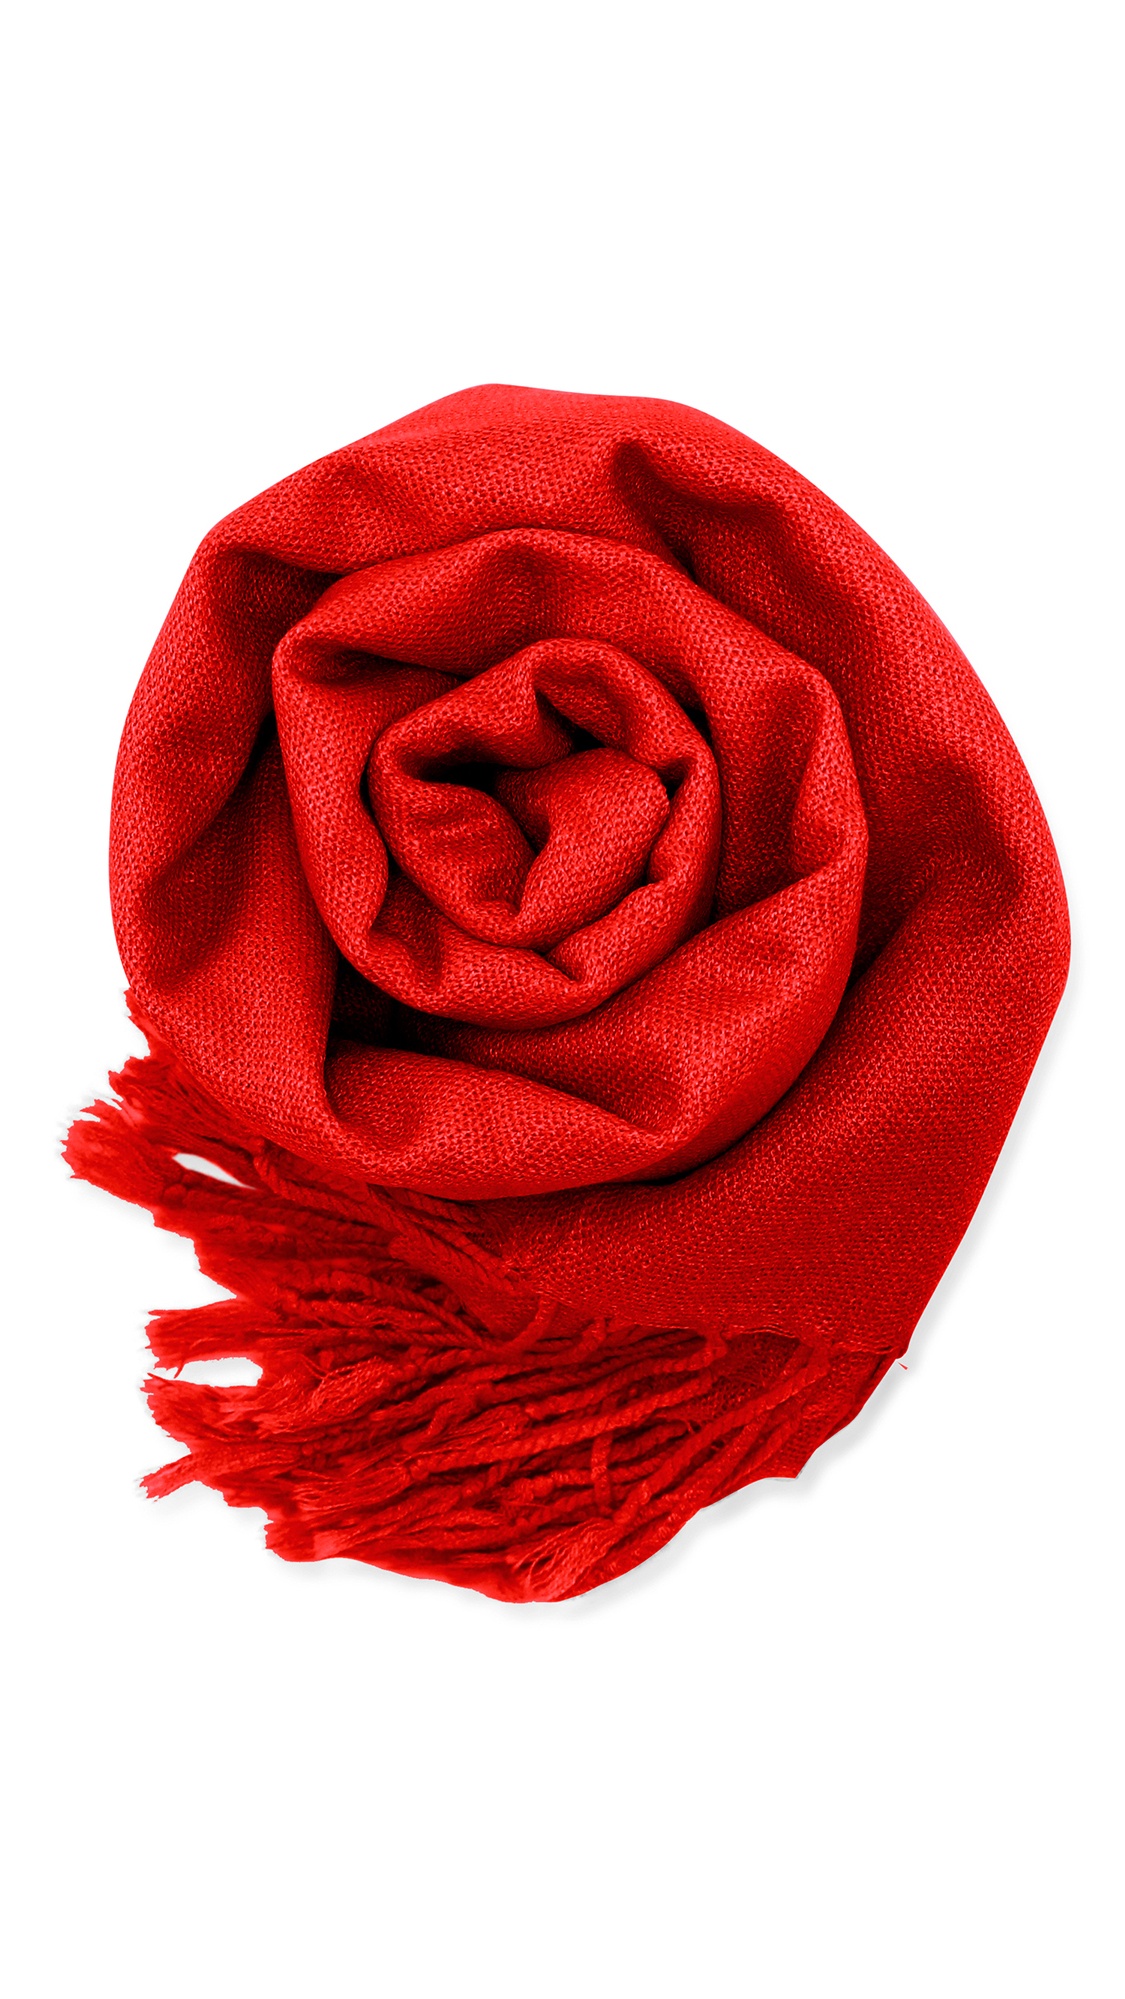 Fashion Women's Scarf Lightweight Long Scarfs Luxury Lady Classic Range Pashmina Silk Solid colors Wraps Shawl Stole Soft Warm Scarves For Women - image 1 of 5